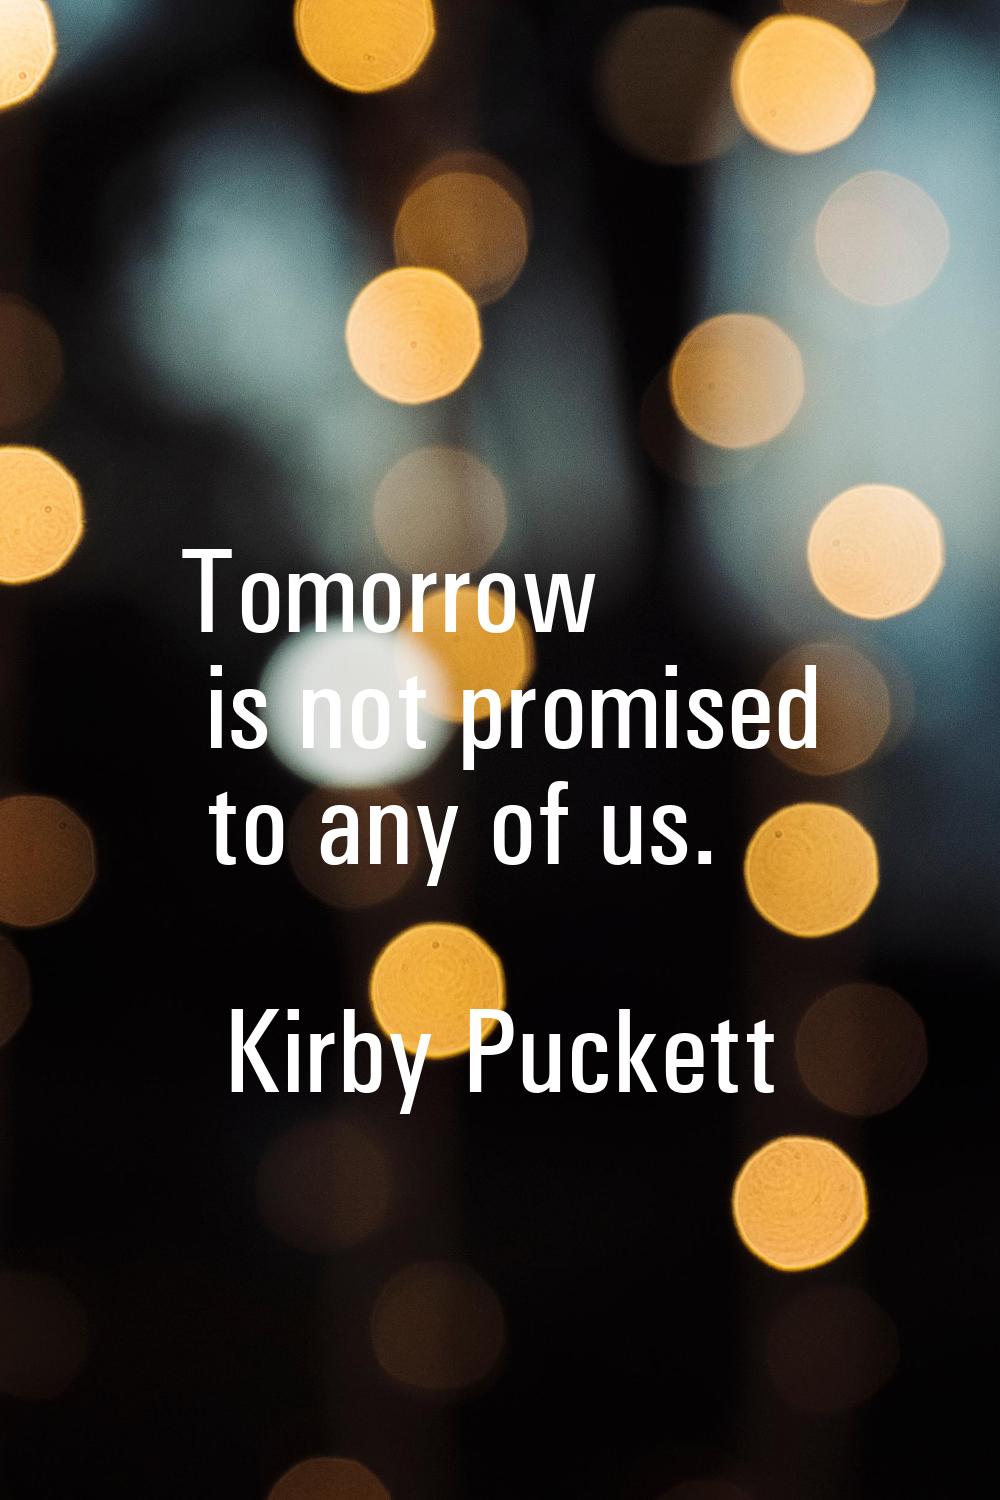 Tomorrow is not promised to any of us.